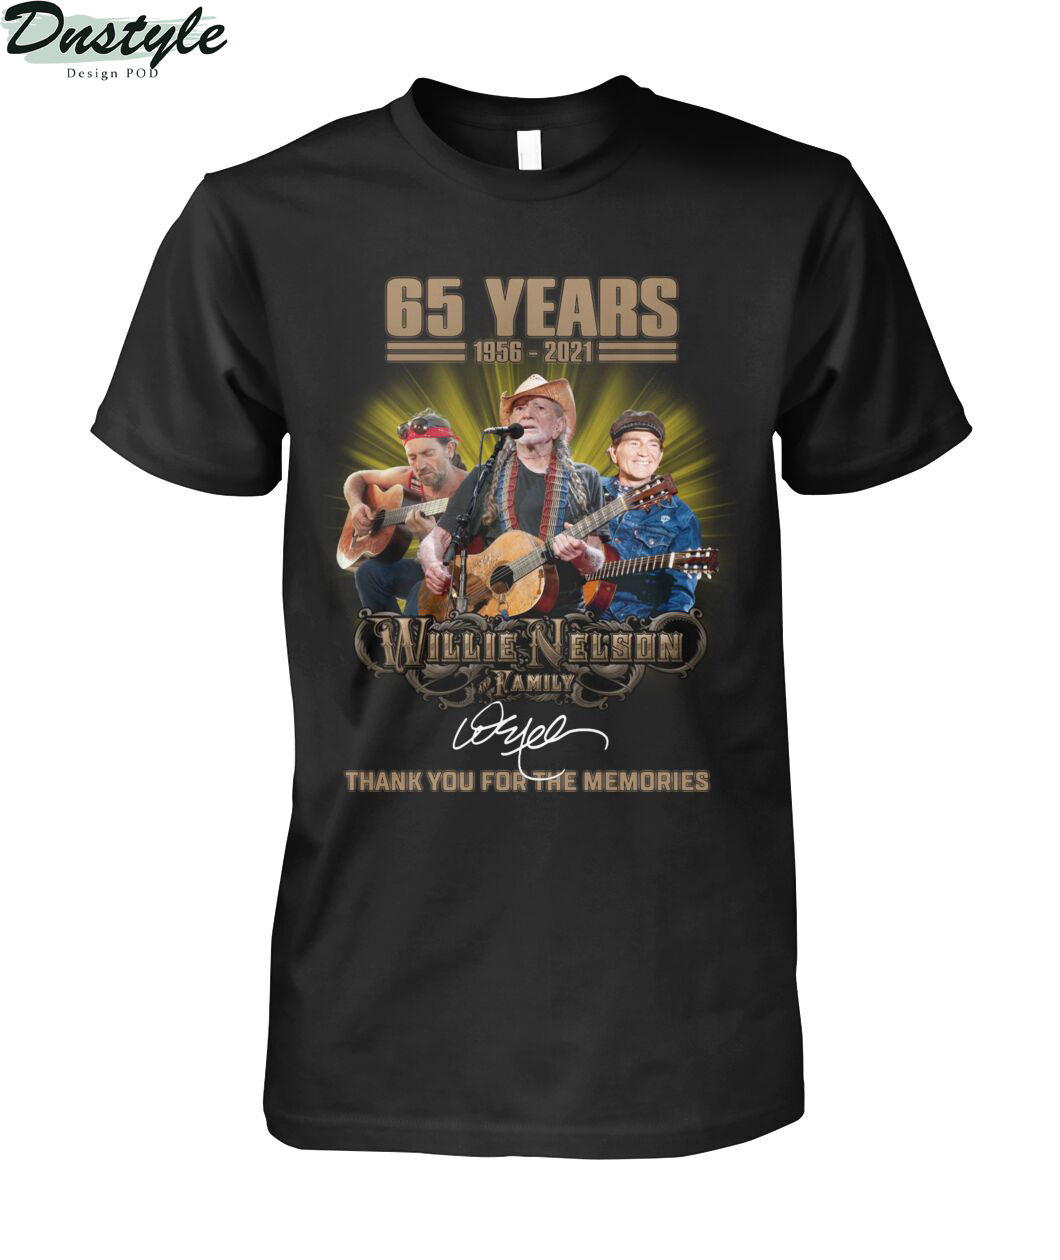 65 years Willie Nelson family thank you for the memories shirt